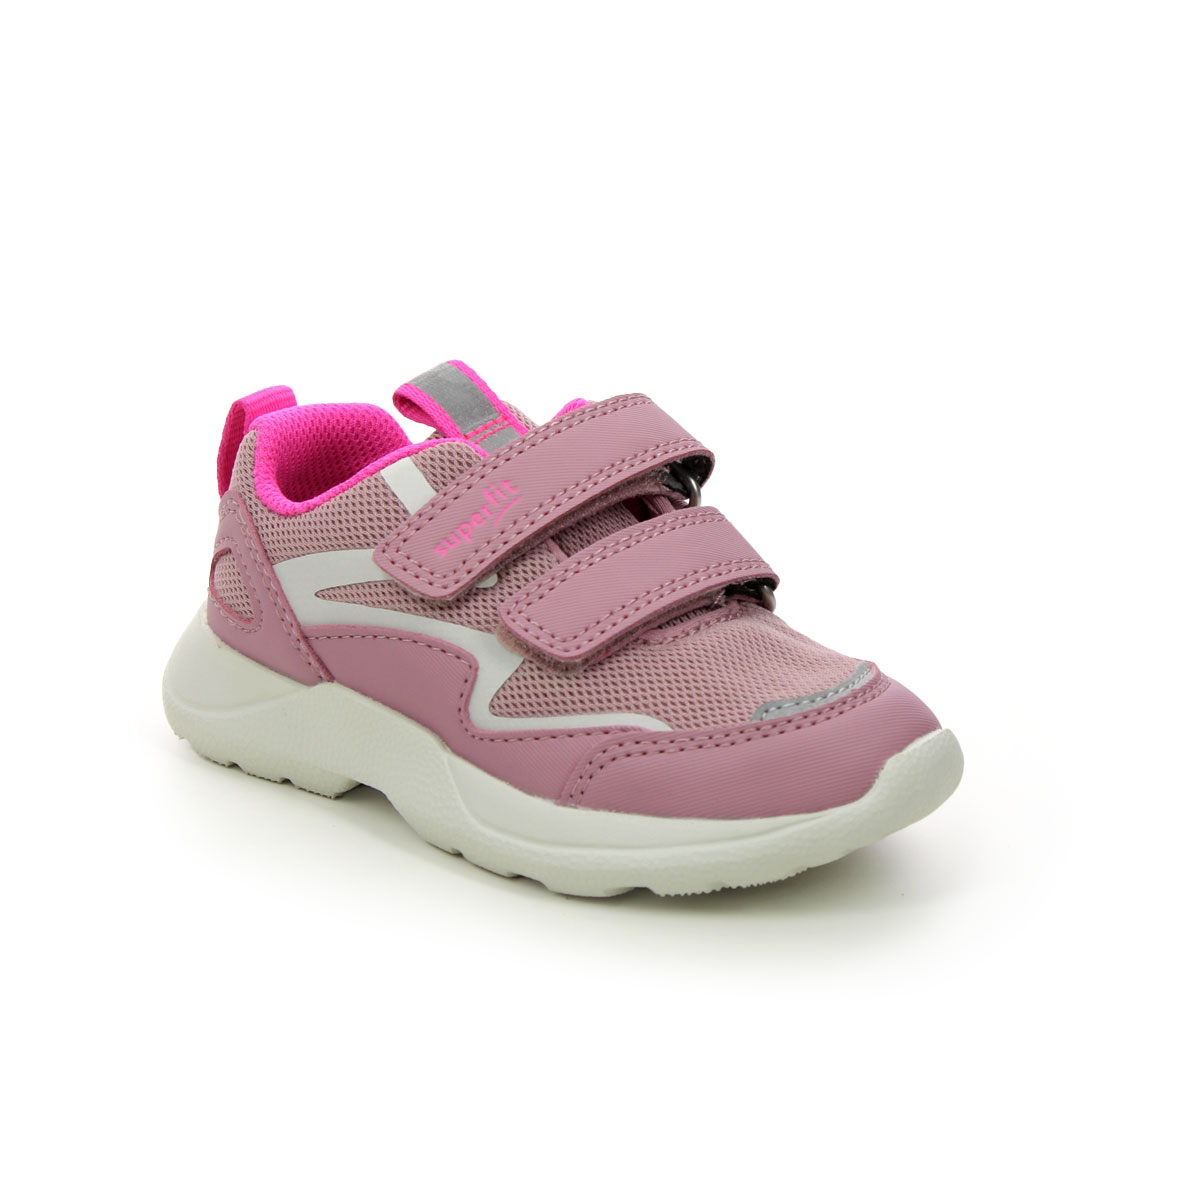 Superfit Rush Mini Pink Kids Girls Trainers 1006206-5510 In Size 26 In Plain Pink For kids